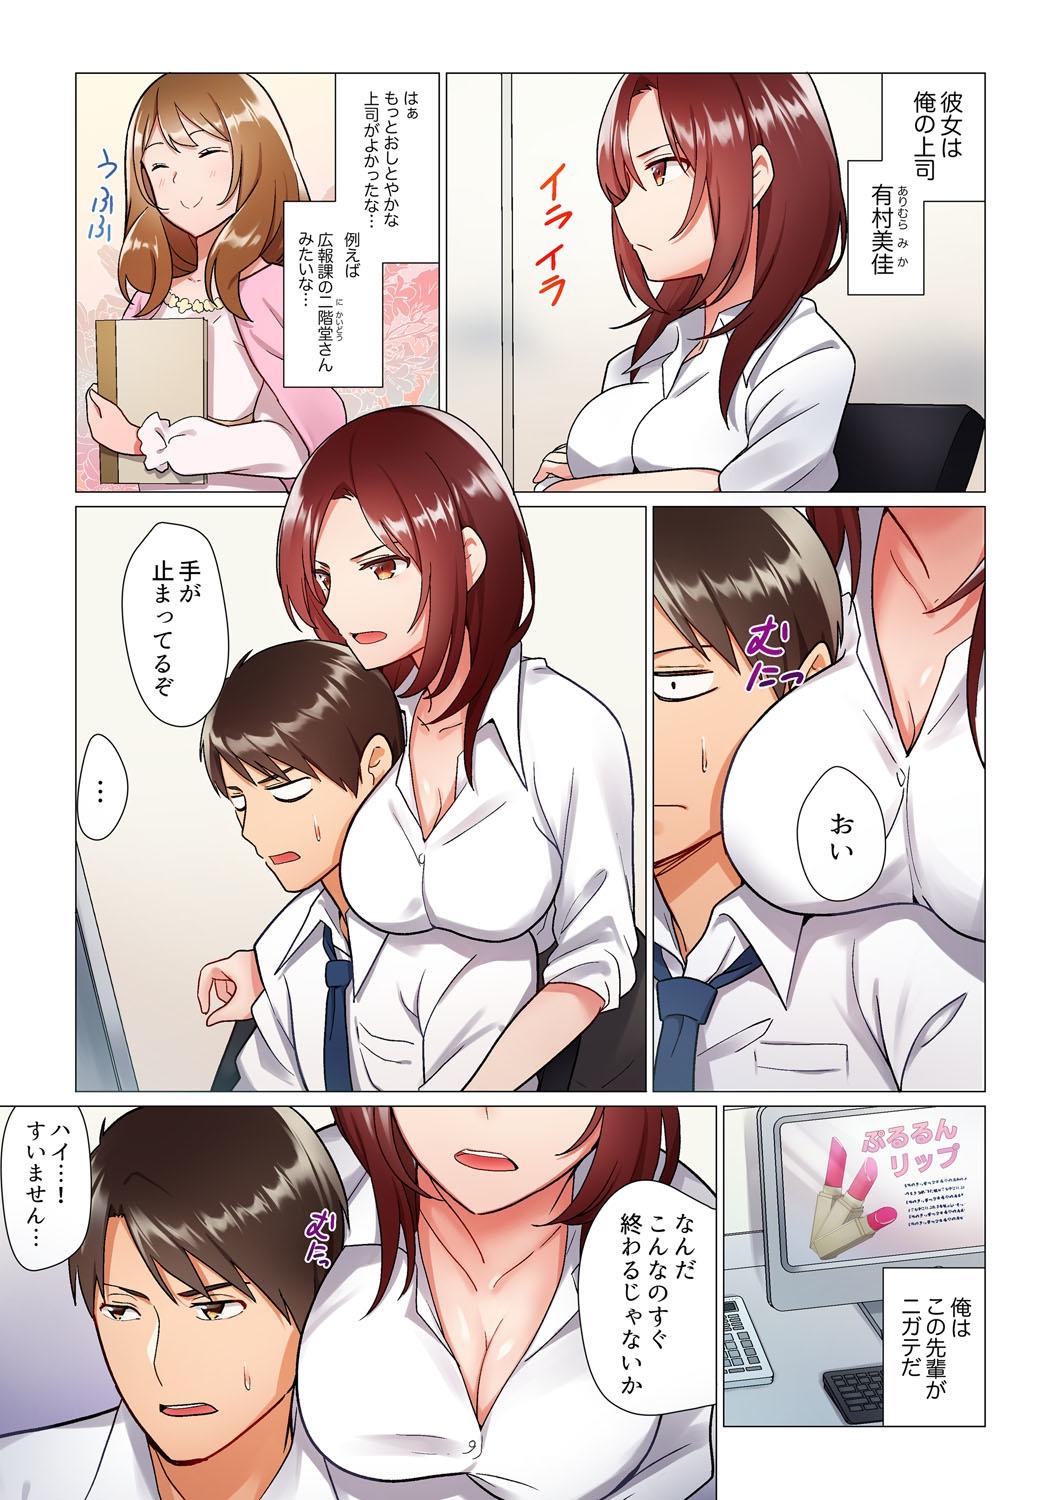 Step 居眠り中の女上司にこっそり挿入（※寝たフリしながらイッてました）1-10 Pounding - Page 4